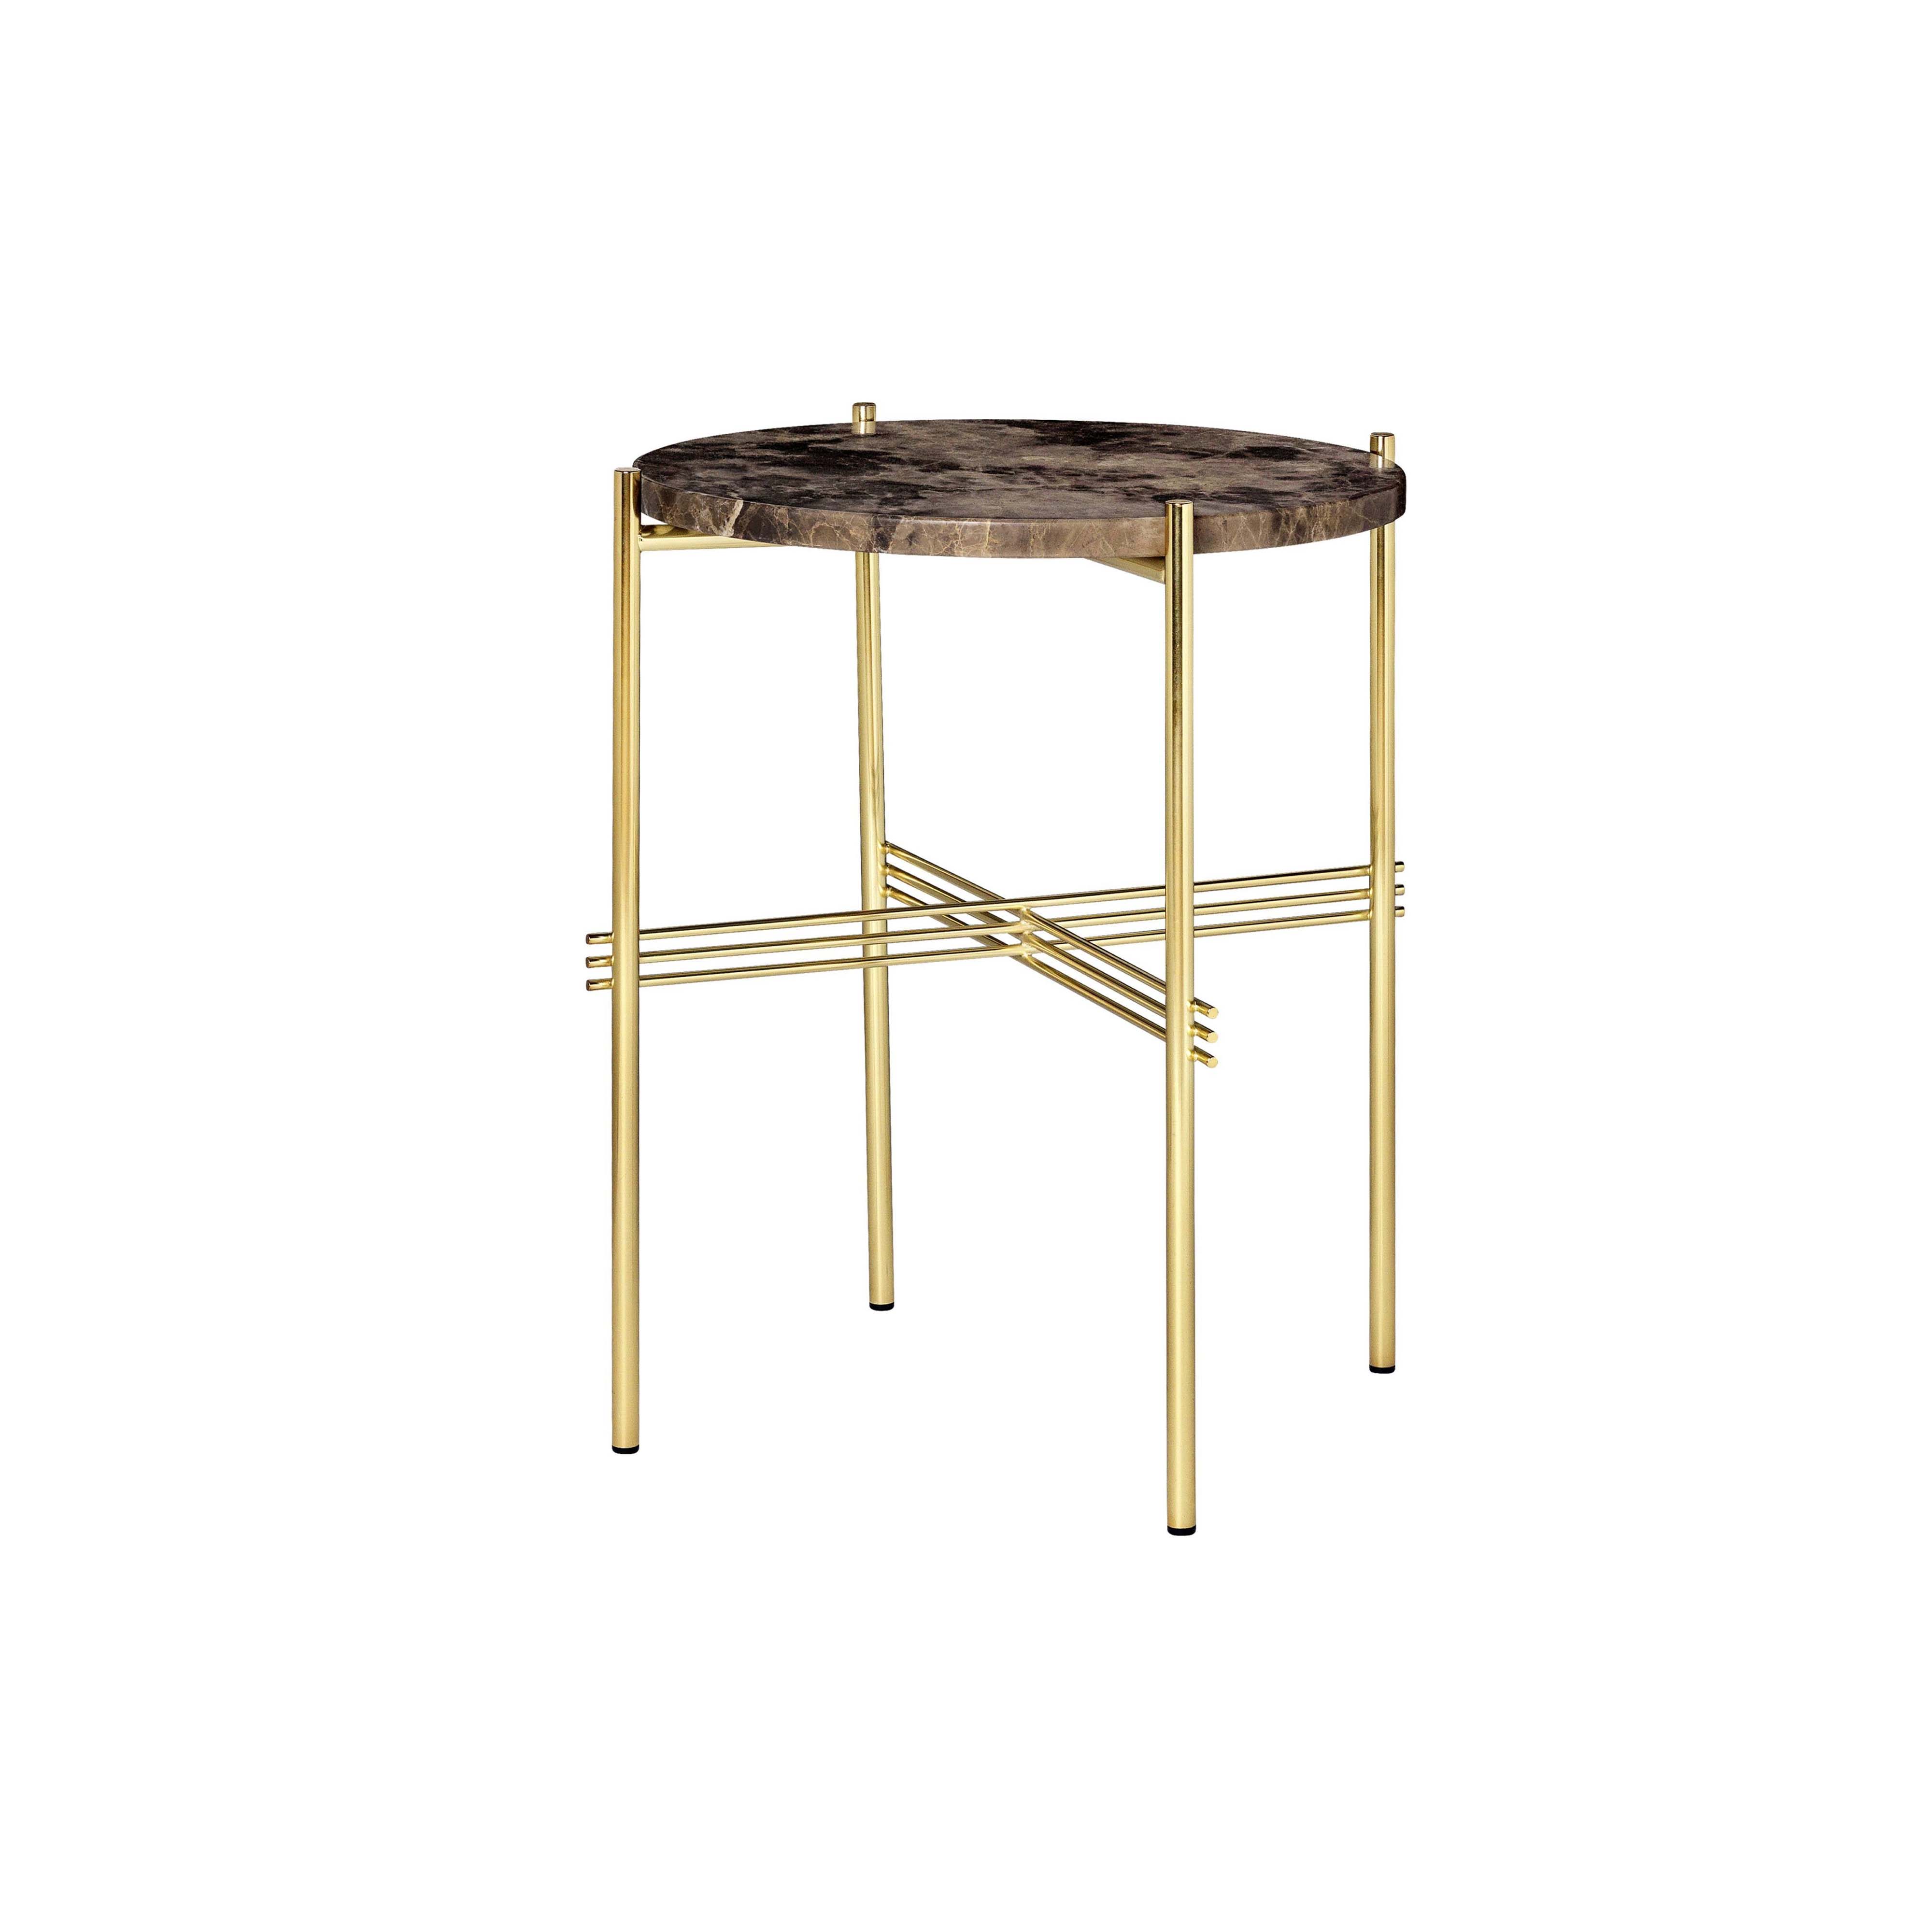 TS Round Side Table: Brass + Brown Emperador Marble